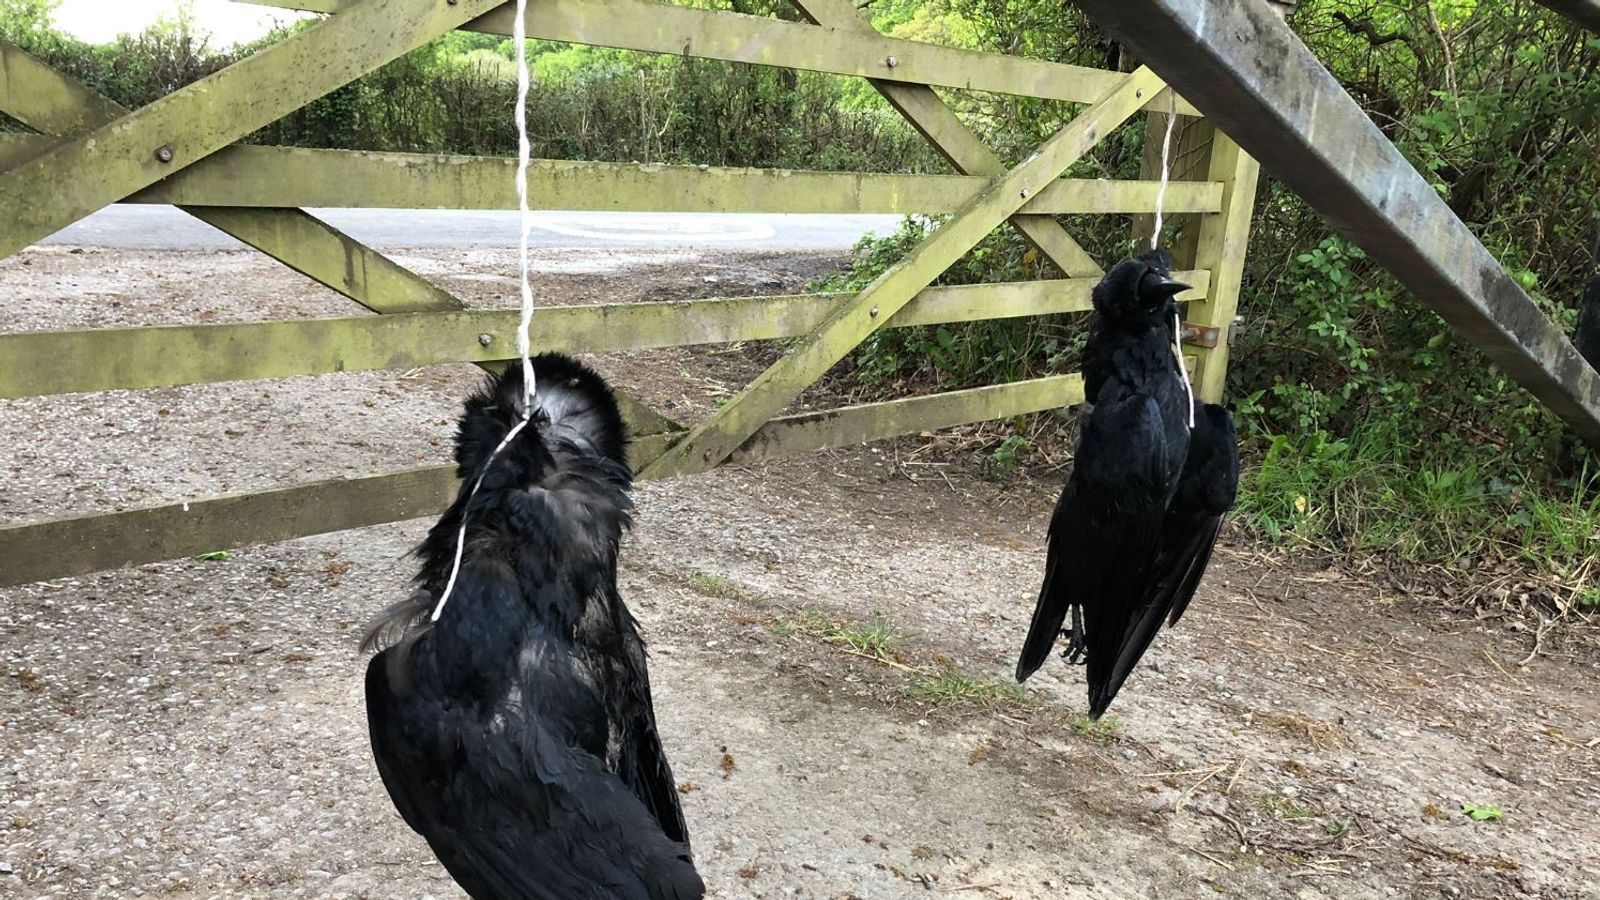 Tv Presenter Chris Packham Contacts Police After Dead Crows Left 